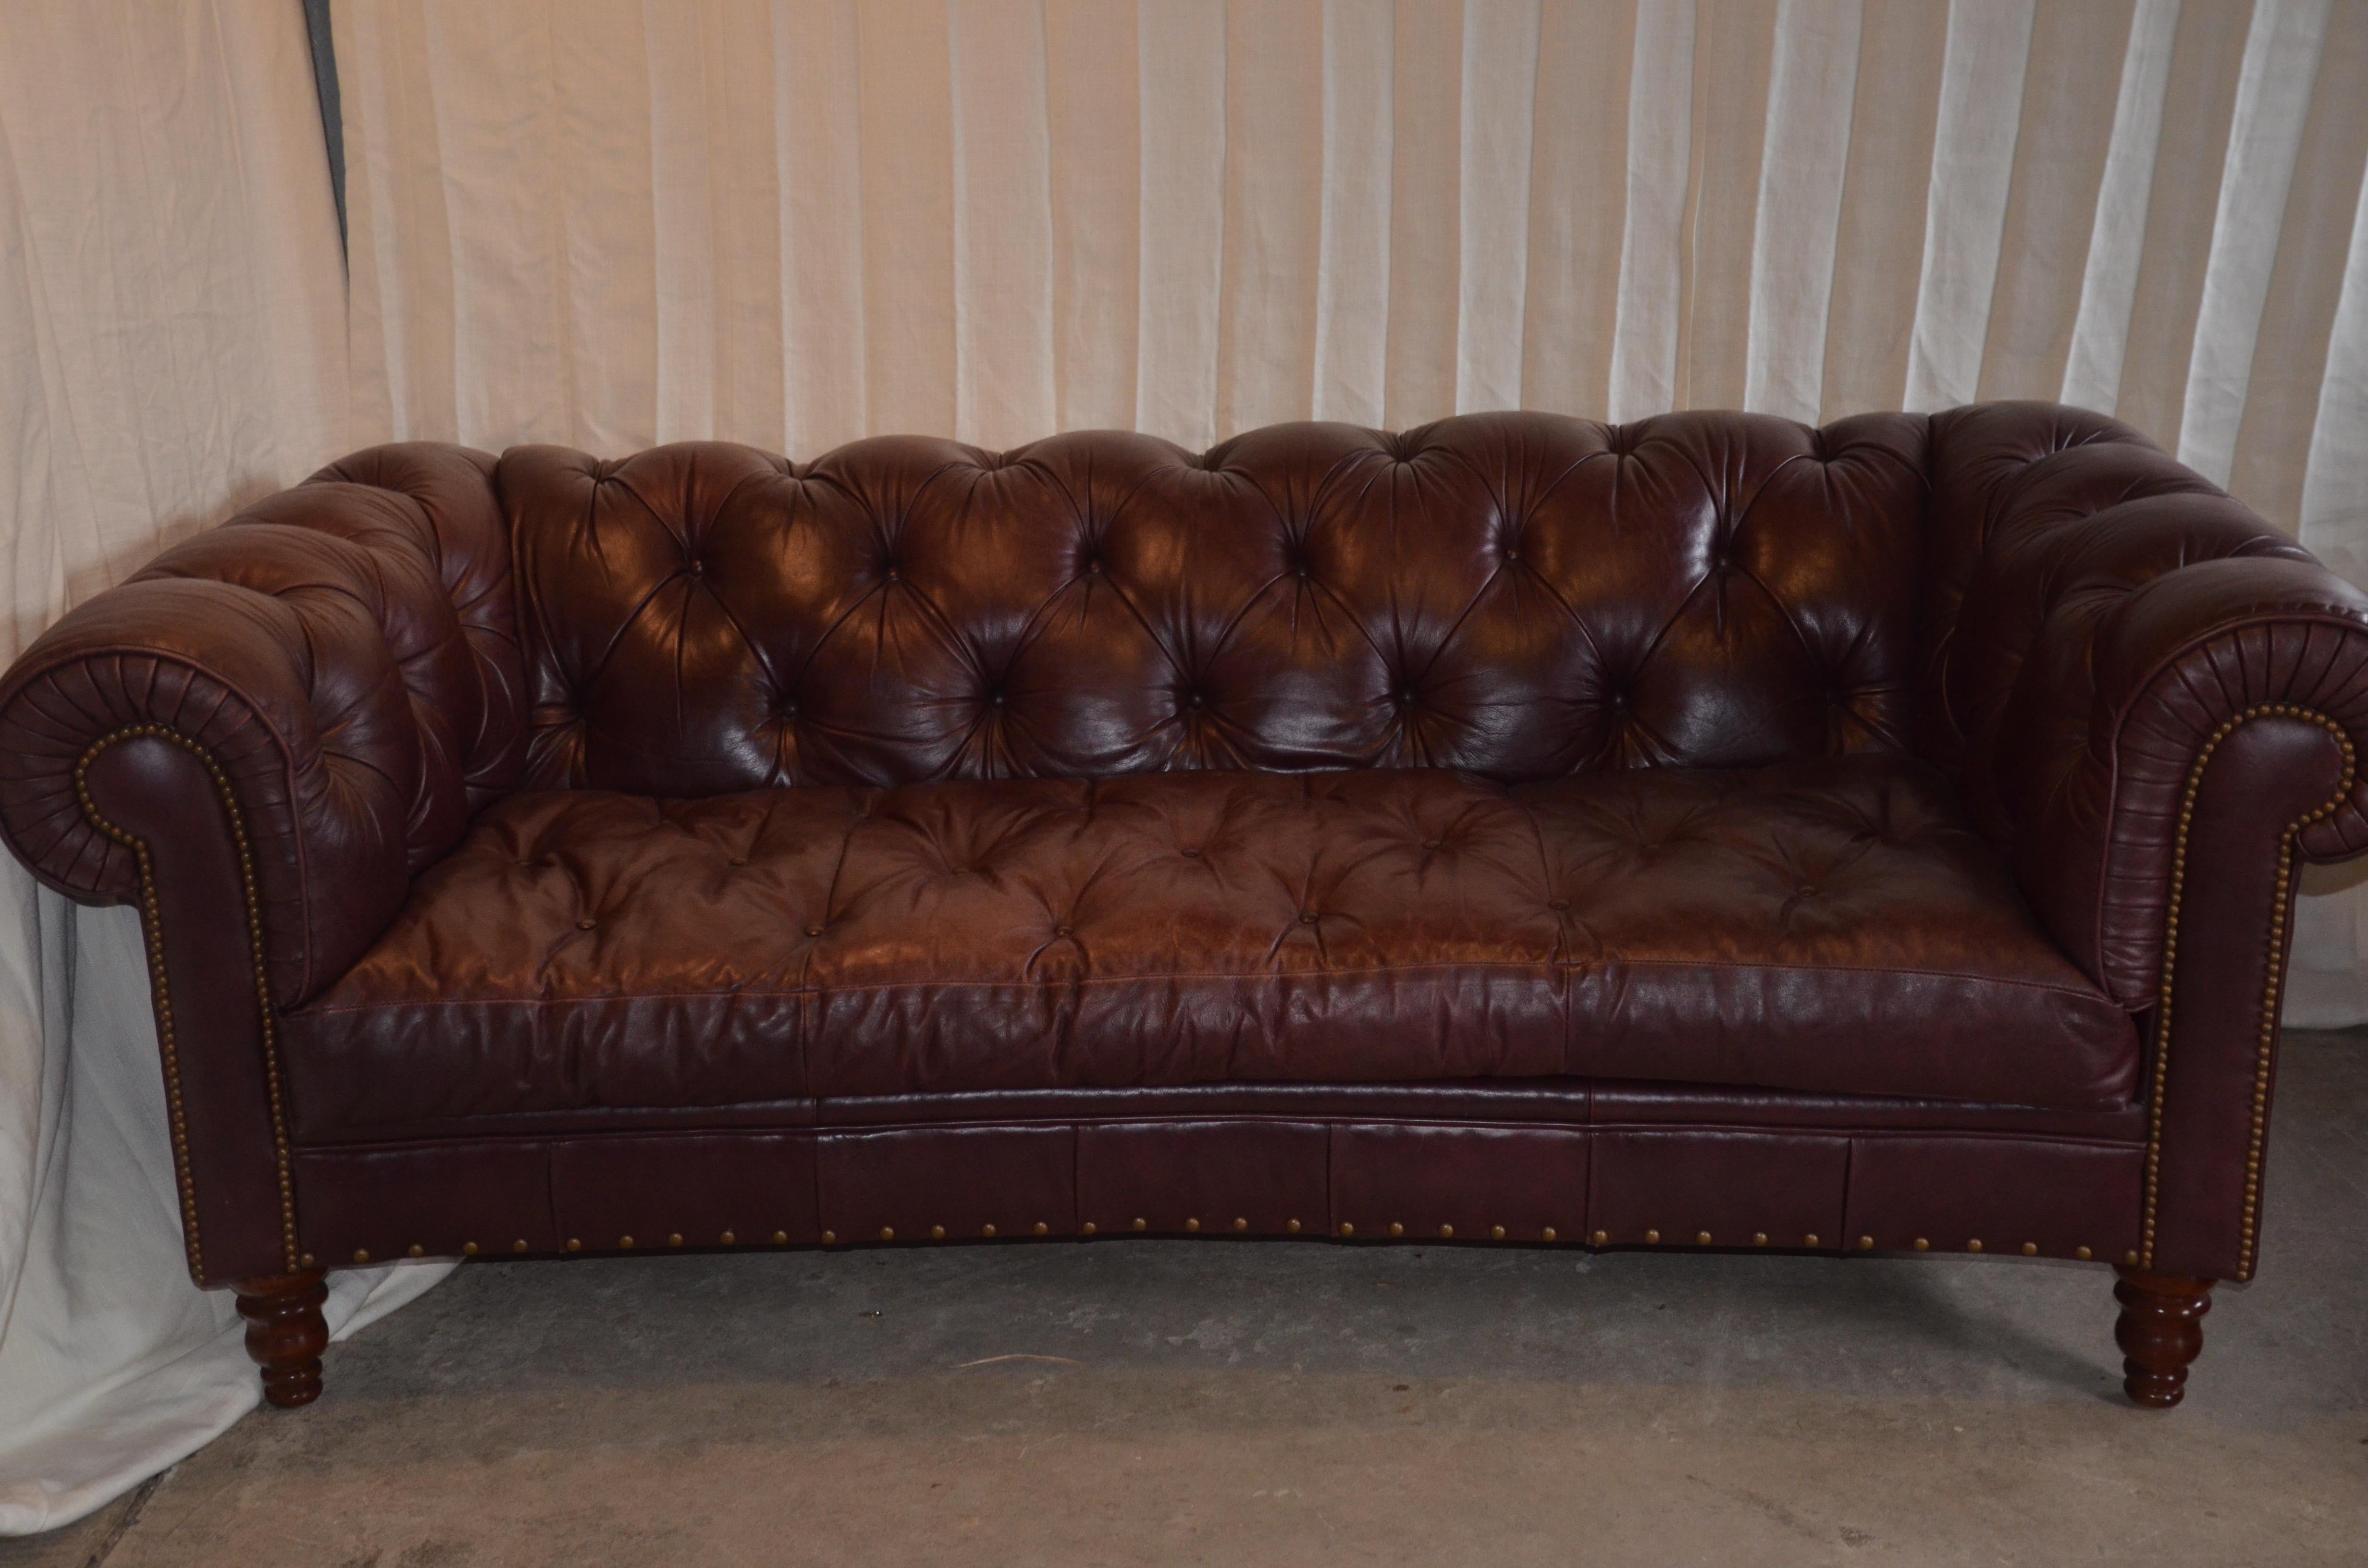 American Tufted Leather Chesterfield Sofa by Century Furniture